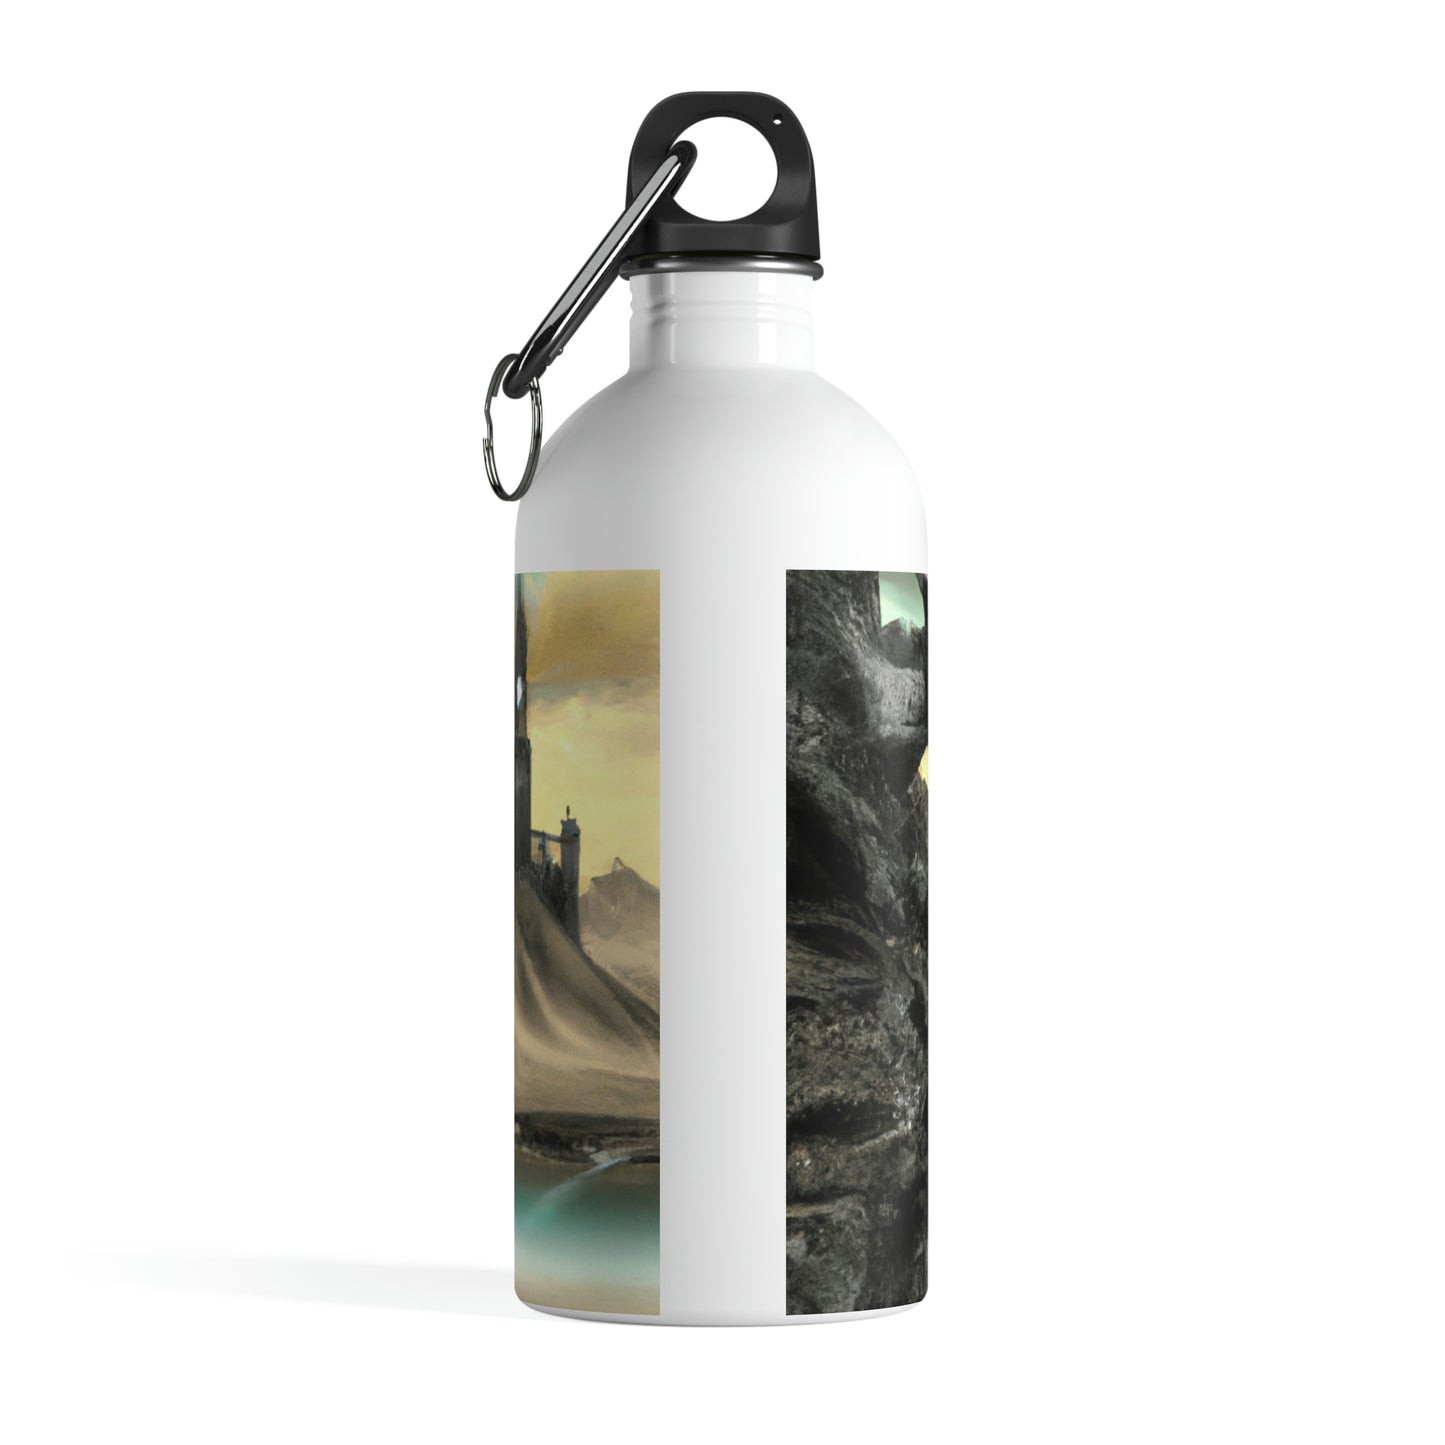 The Knight and the Dragon's Throne - The Alien Stainless Steel Water Bottle